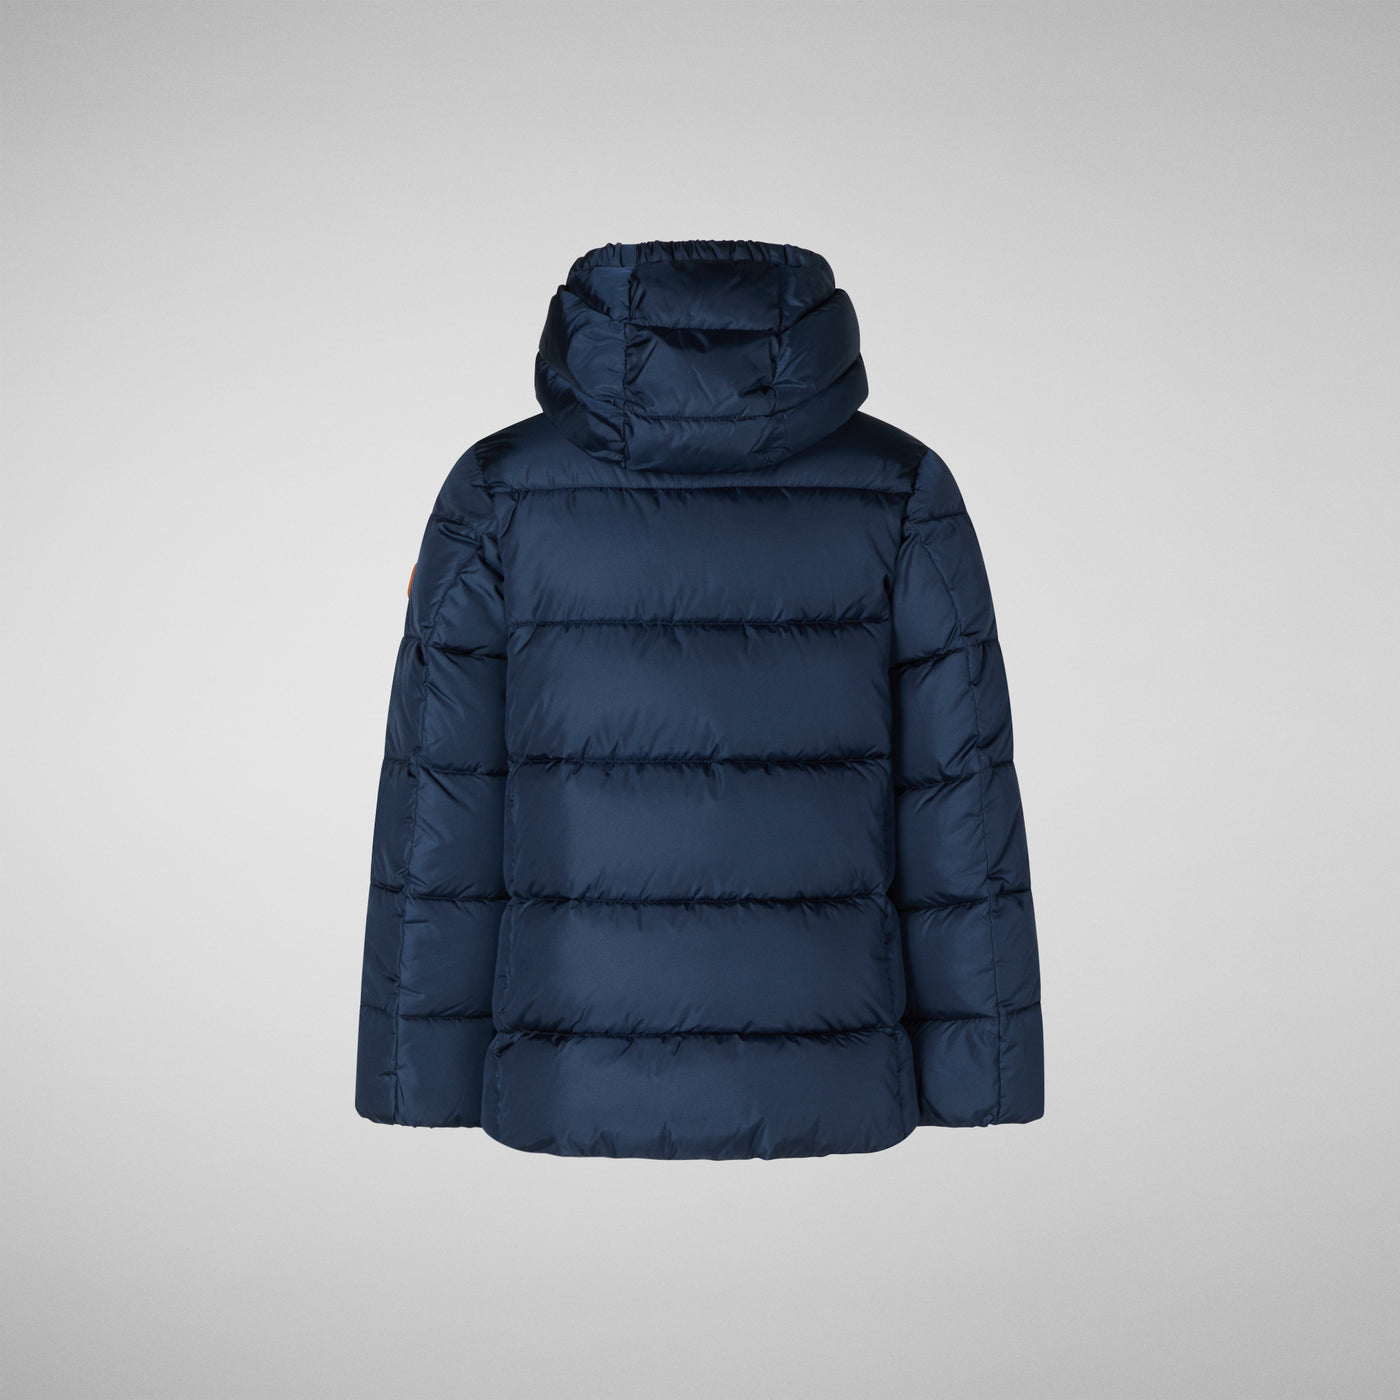 Back View of Boys' Joshua Hooded Puffer Coat in Navy Blue